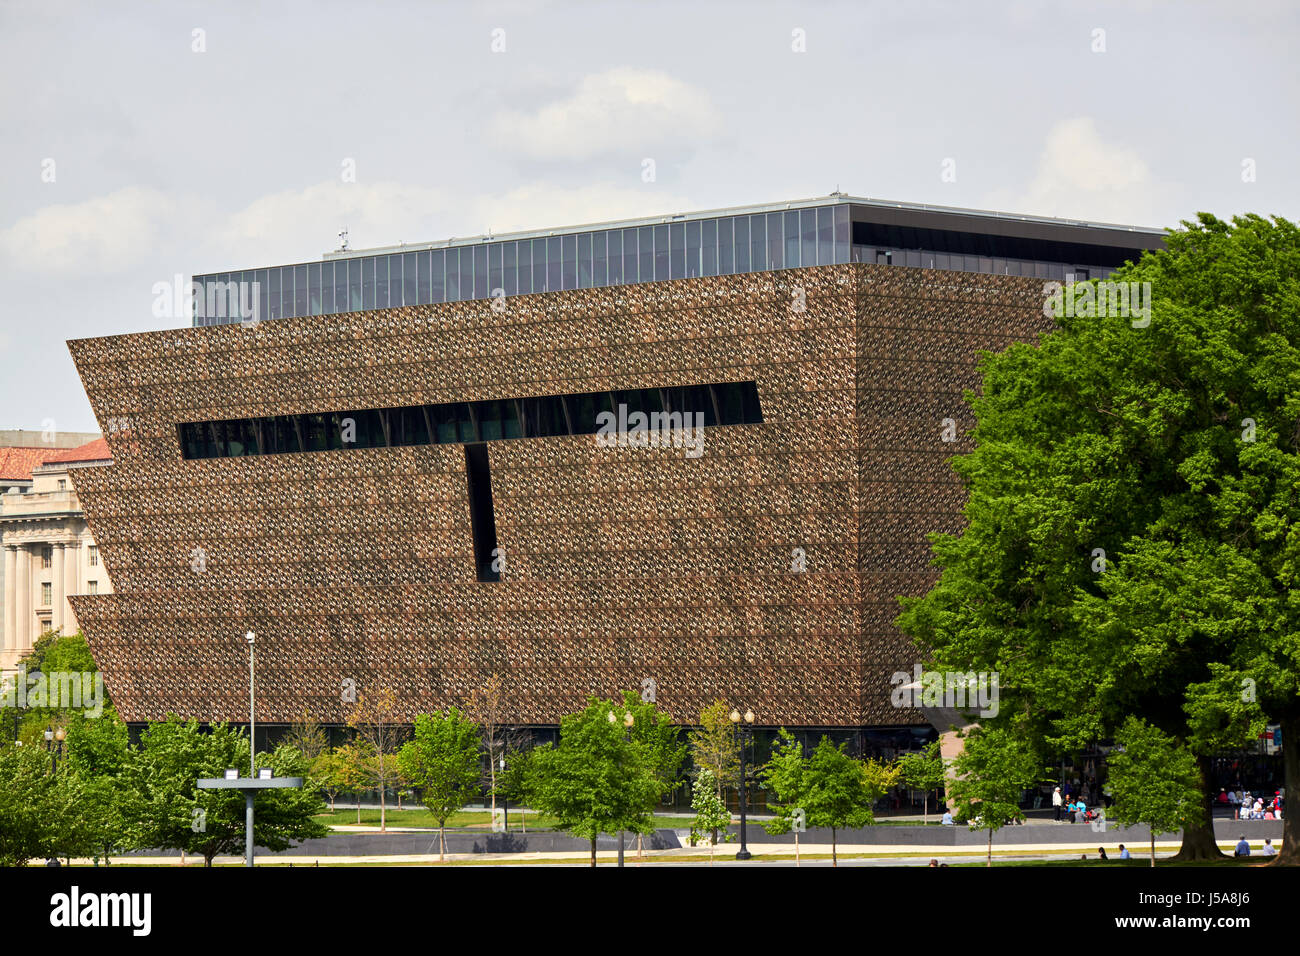 Smithsonian National Museum of african american history and culture Washington DC USA Banque D'Images